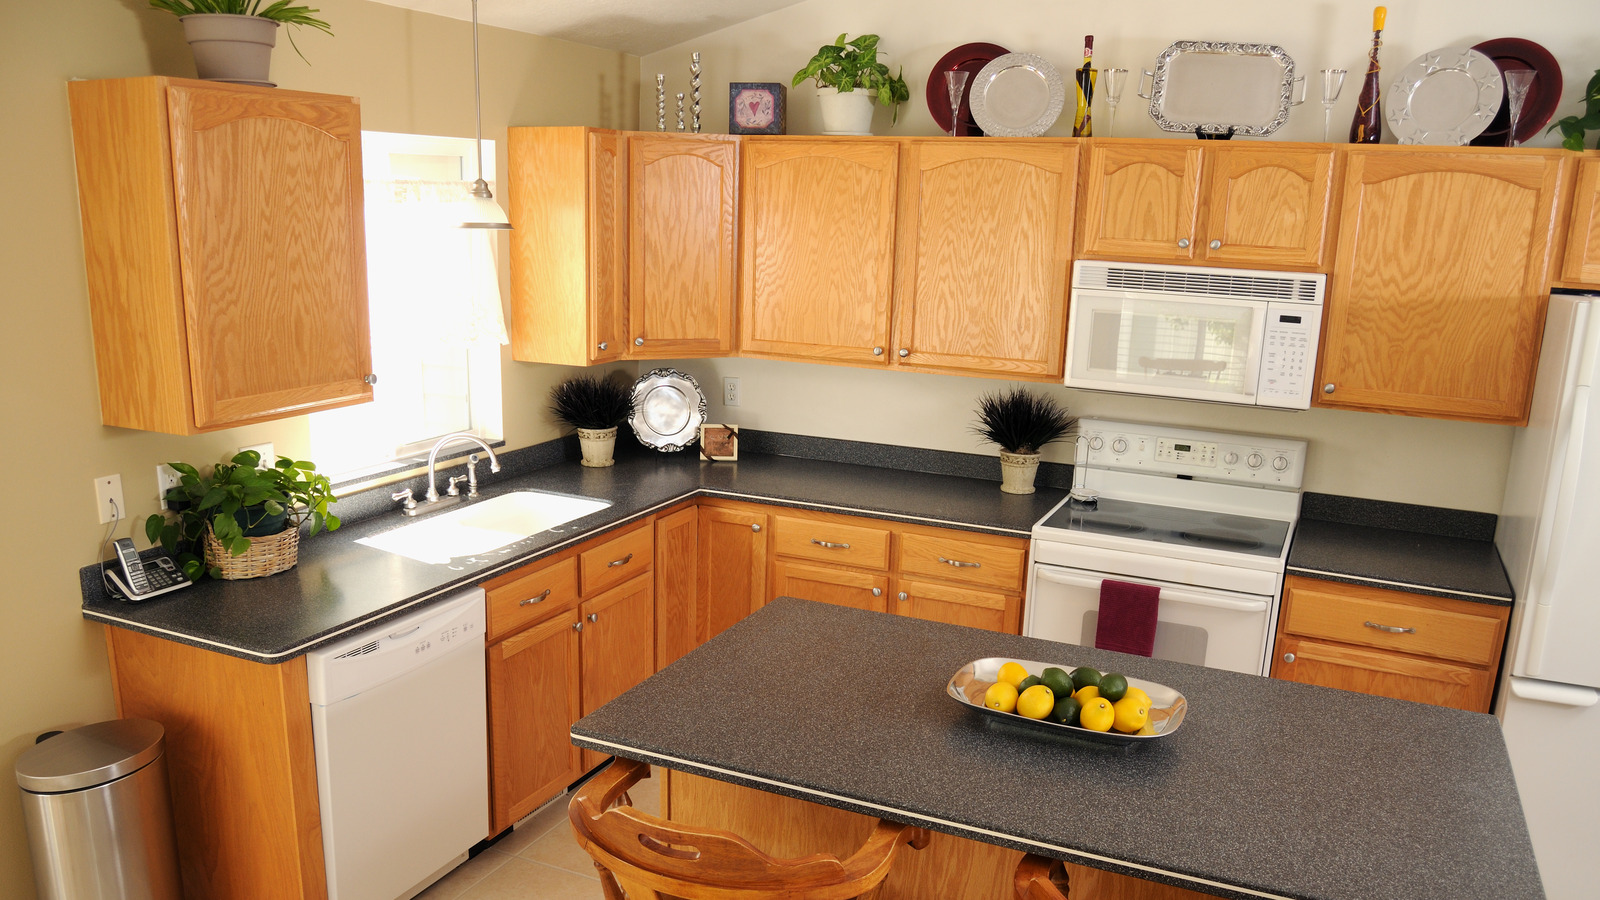 Bring Those Outdated Wooden Kitchen Cabinets Back In Style Without ...